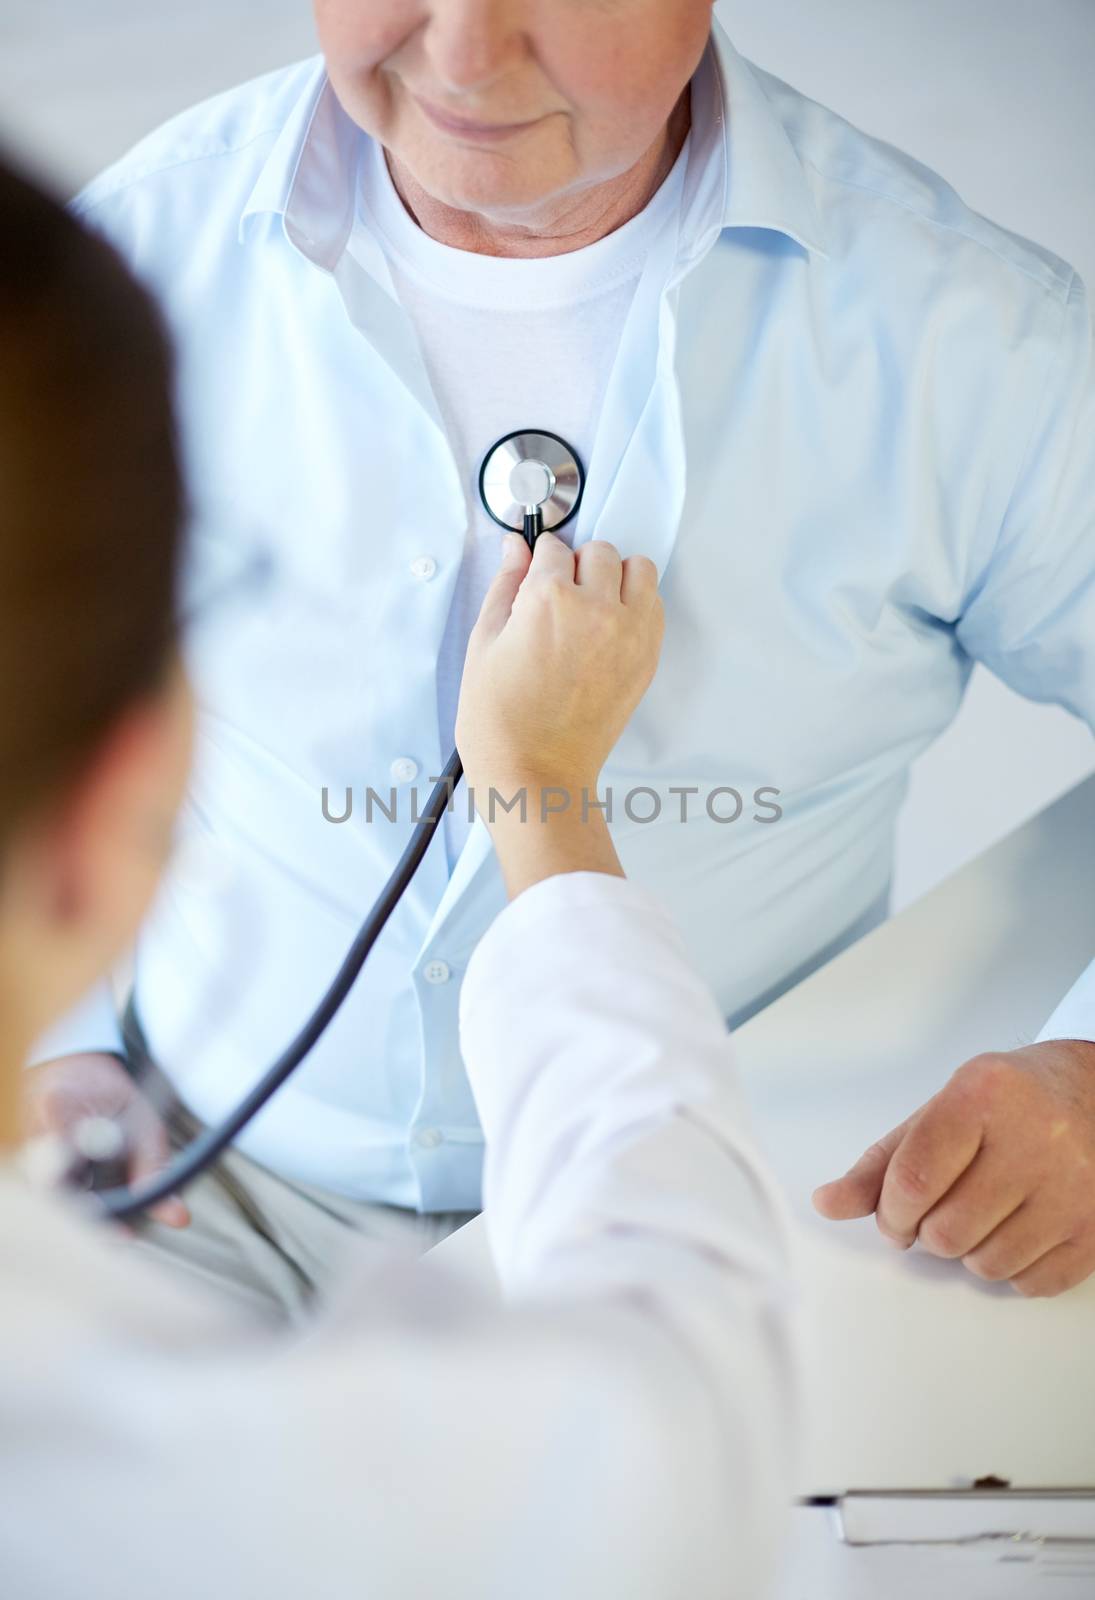 healthcare, elderly and medical concept - close up of doctor with stethoscope listening to senior man breath or heartbeat in hospital